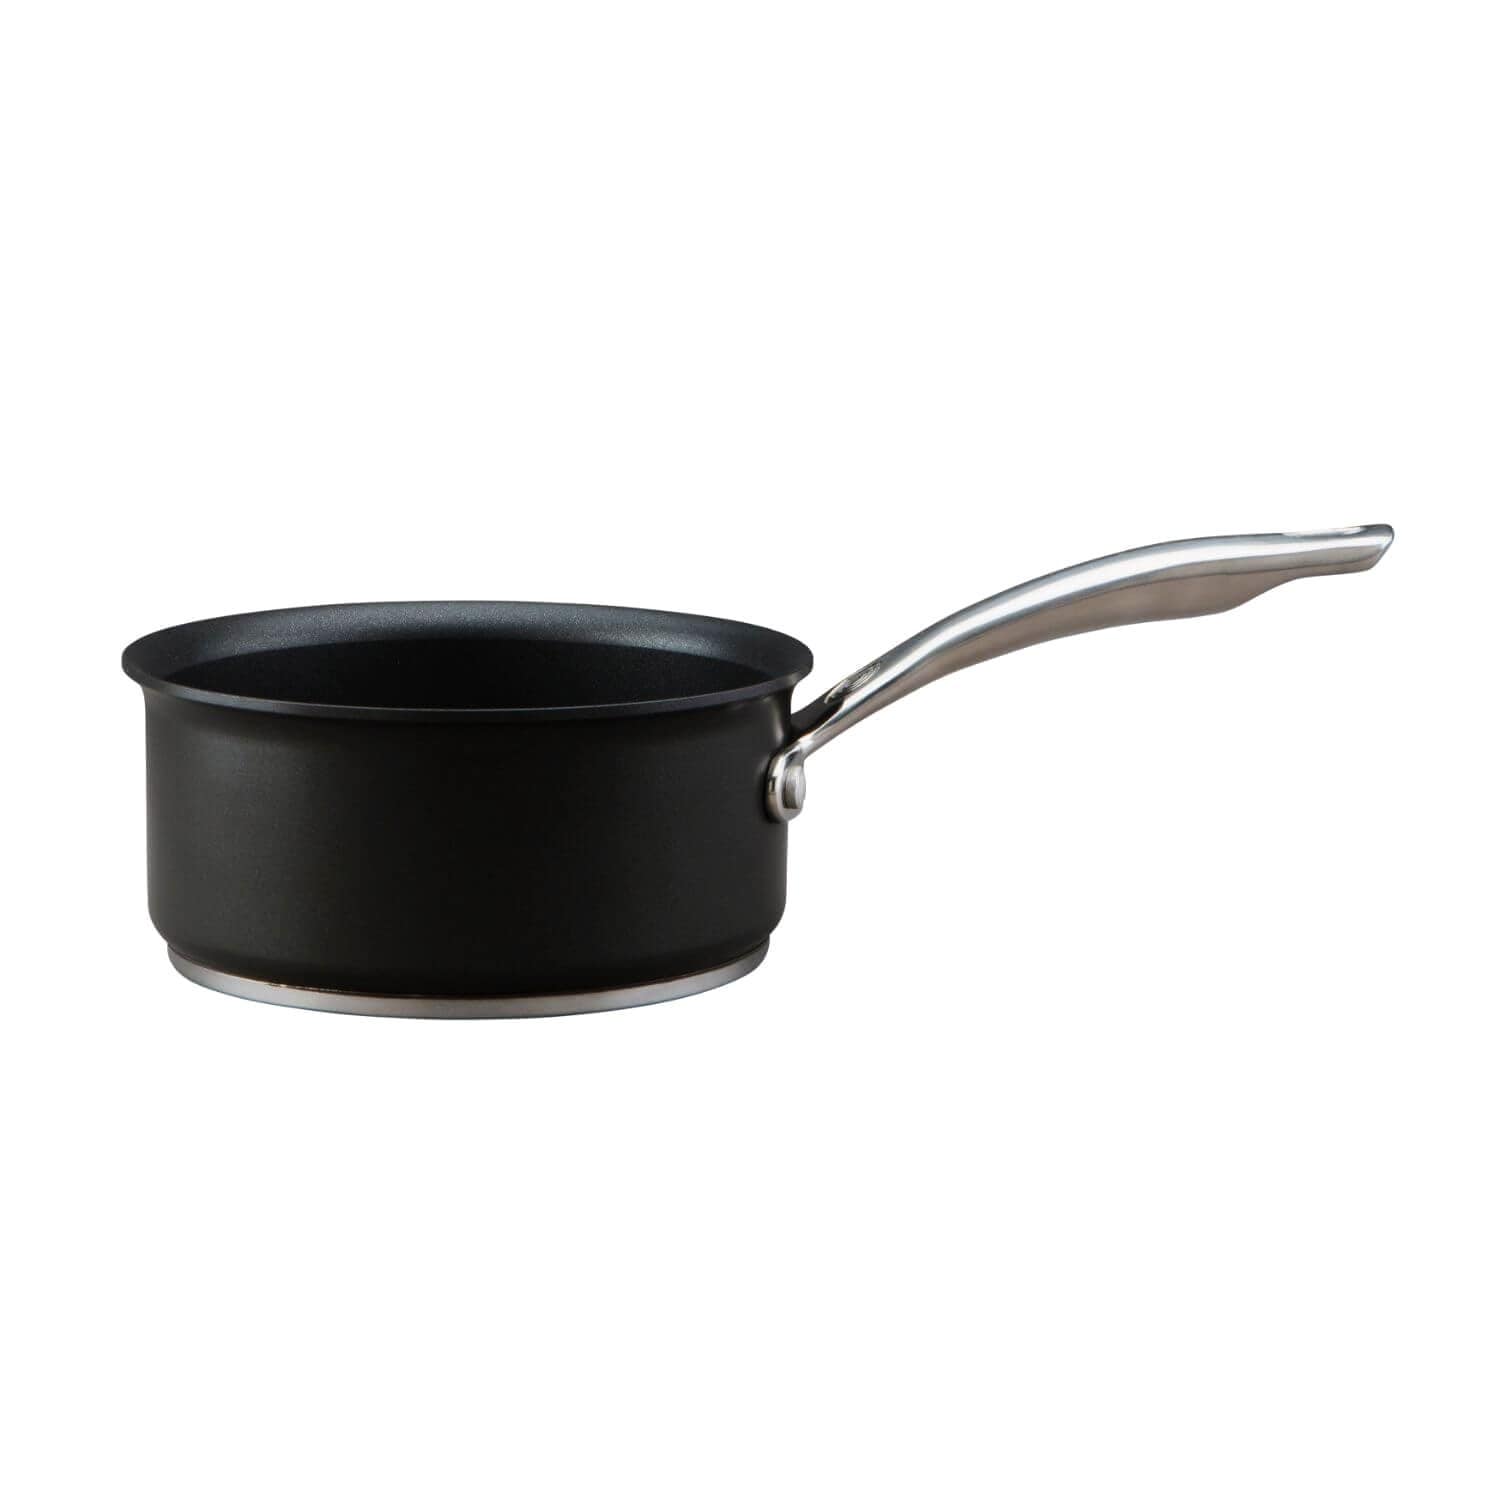 Circulon Excellence Milk Pan with Lid - 16 cm - 88900 - Jashanmal Home